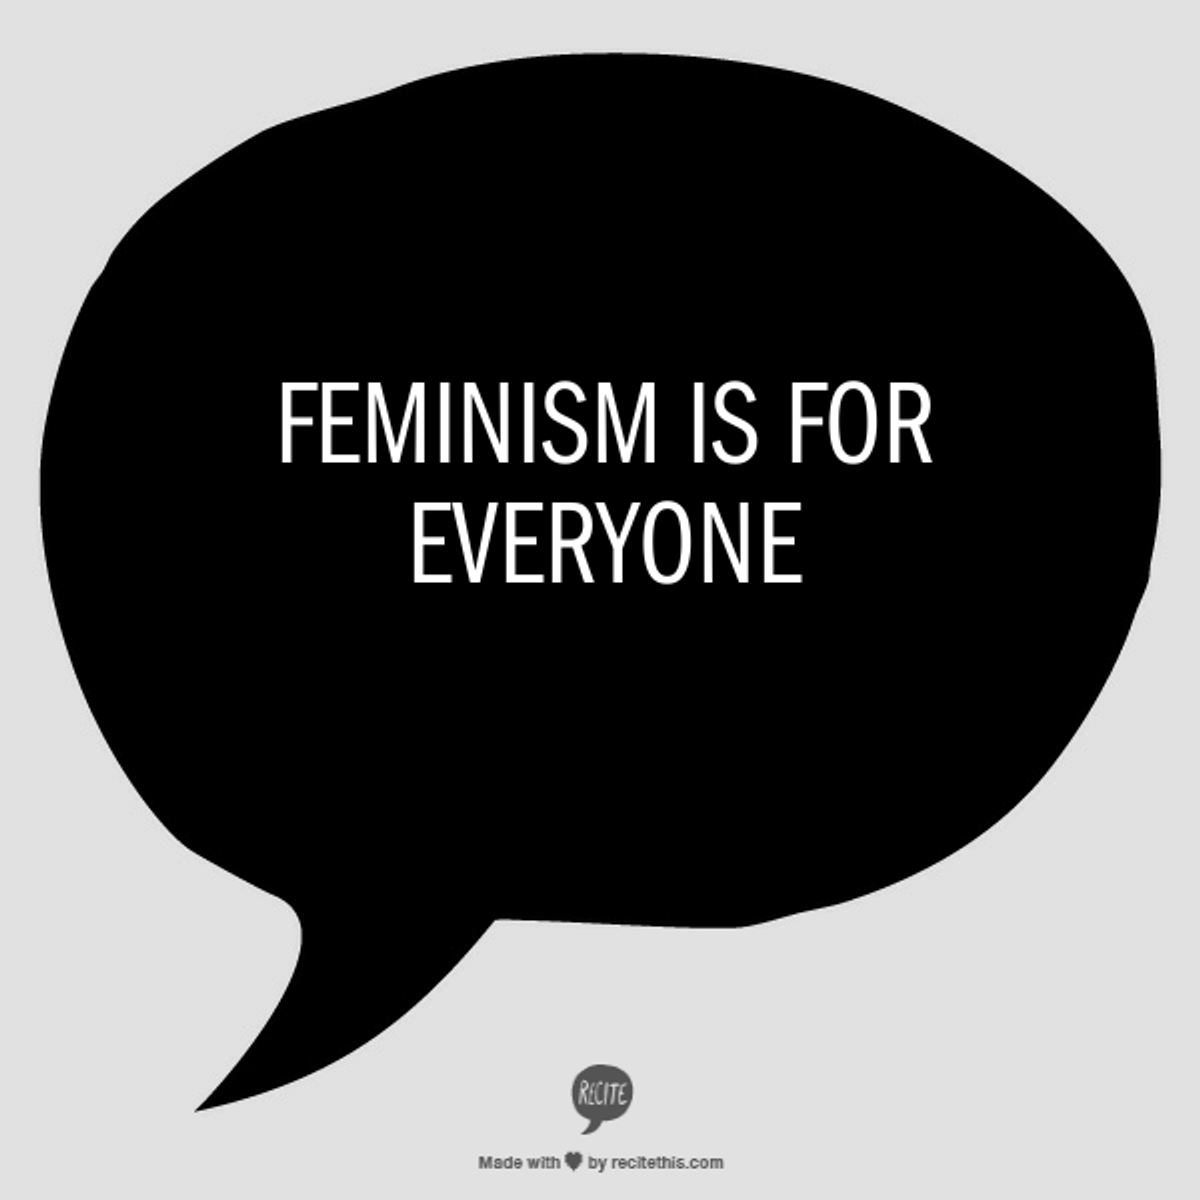 7 Things Every Human Can Do To Support Feminism